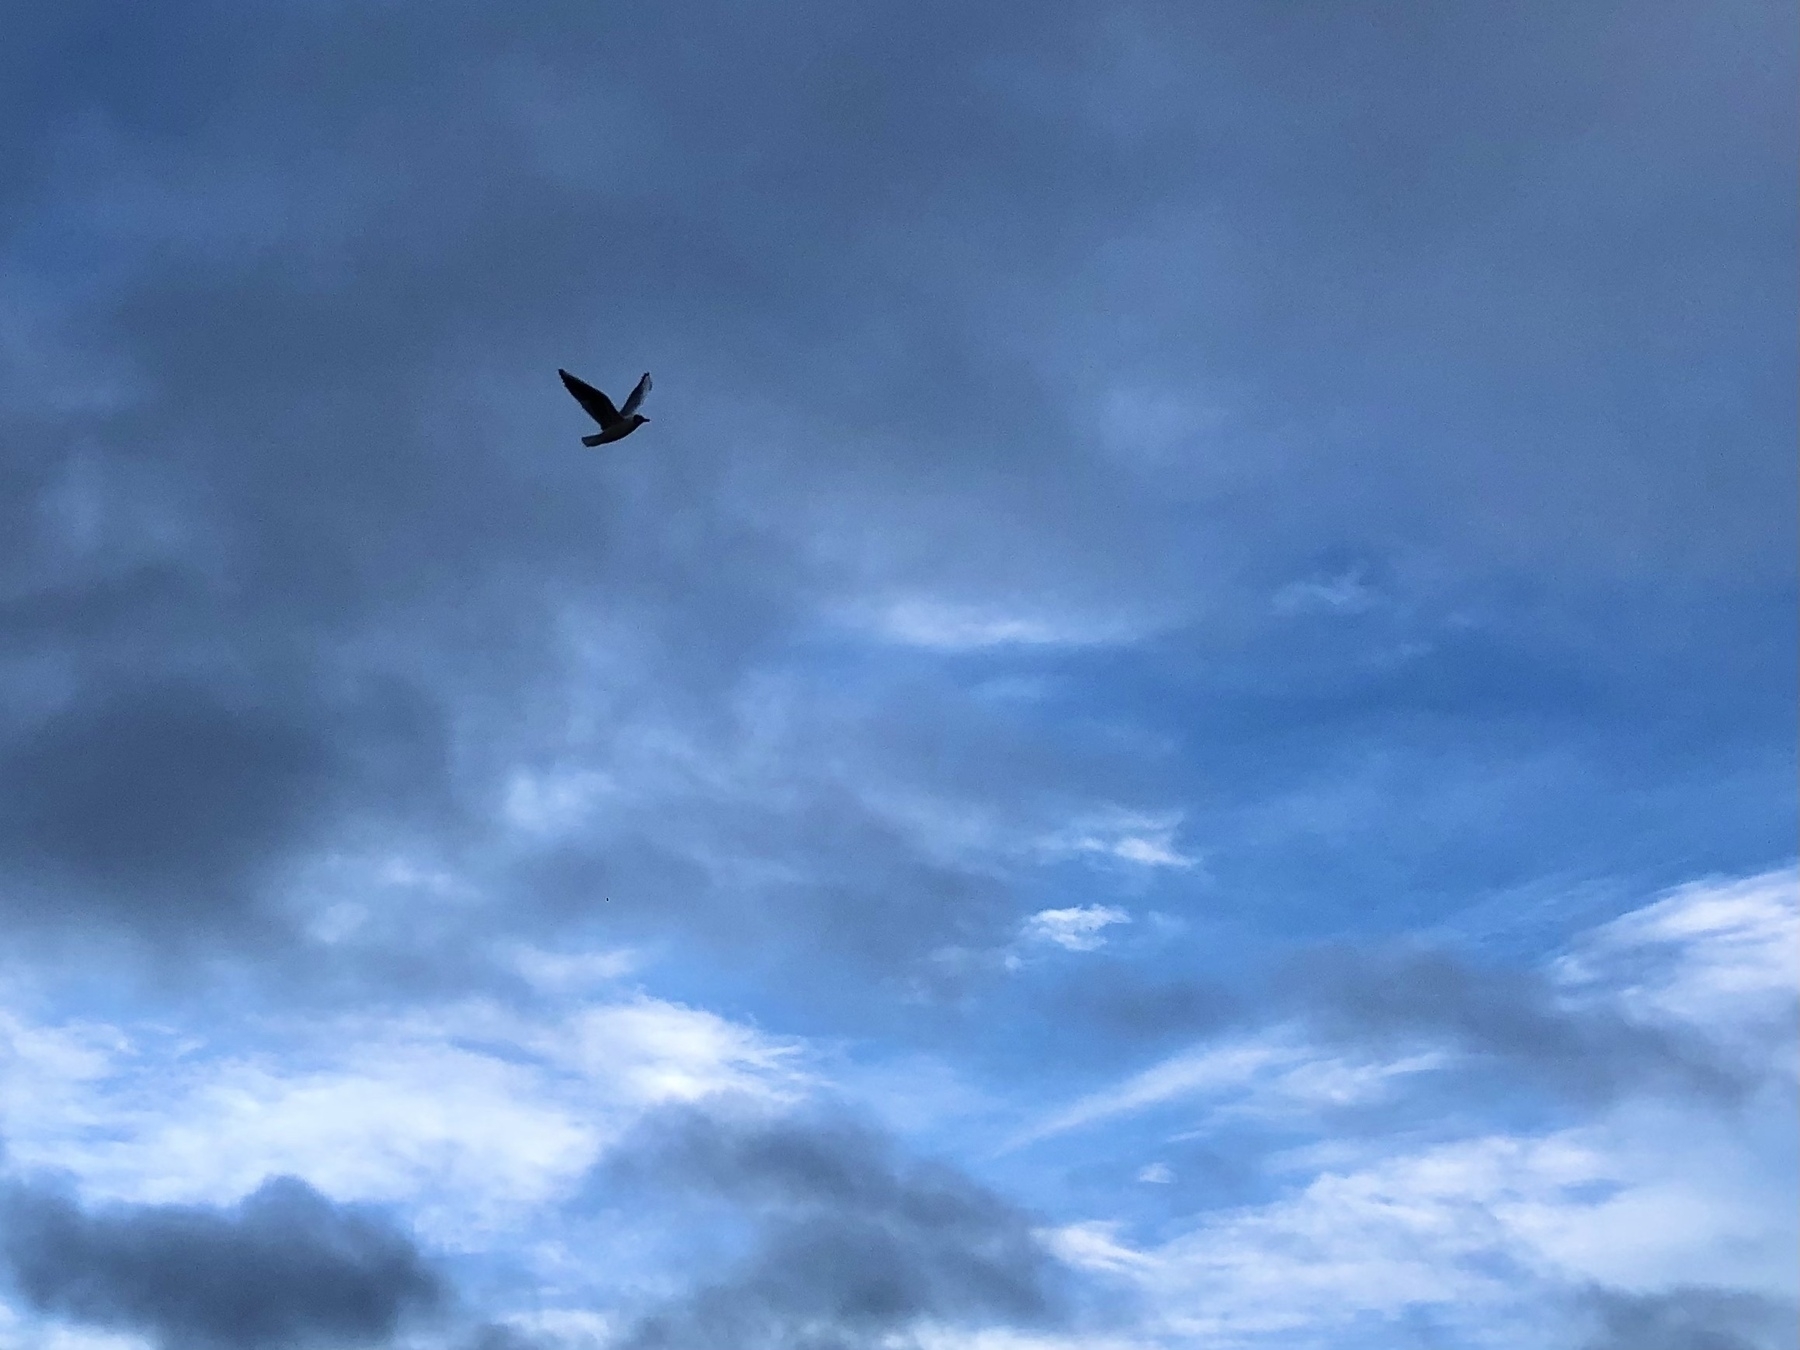 Seagull in a cloudy sky with blue shining through